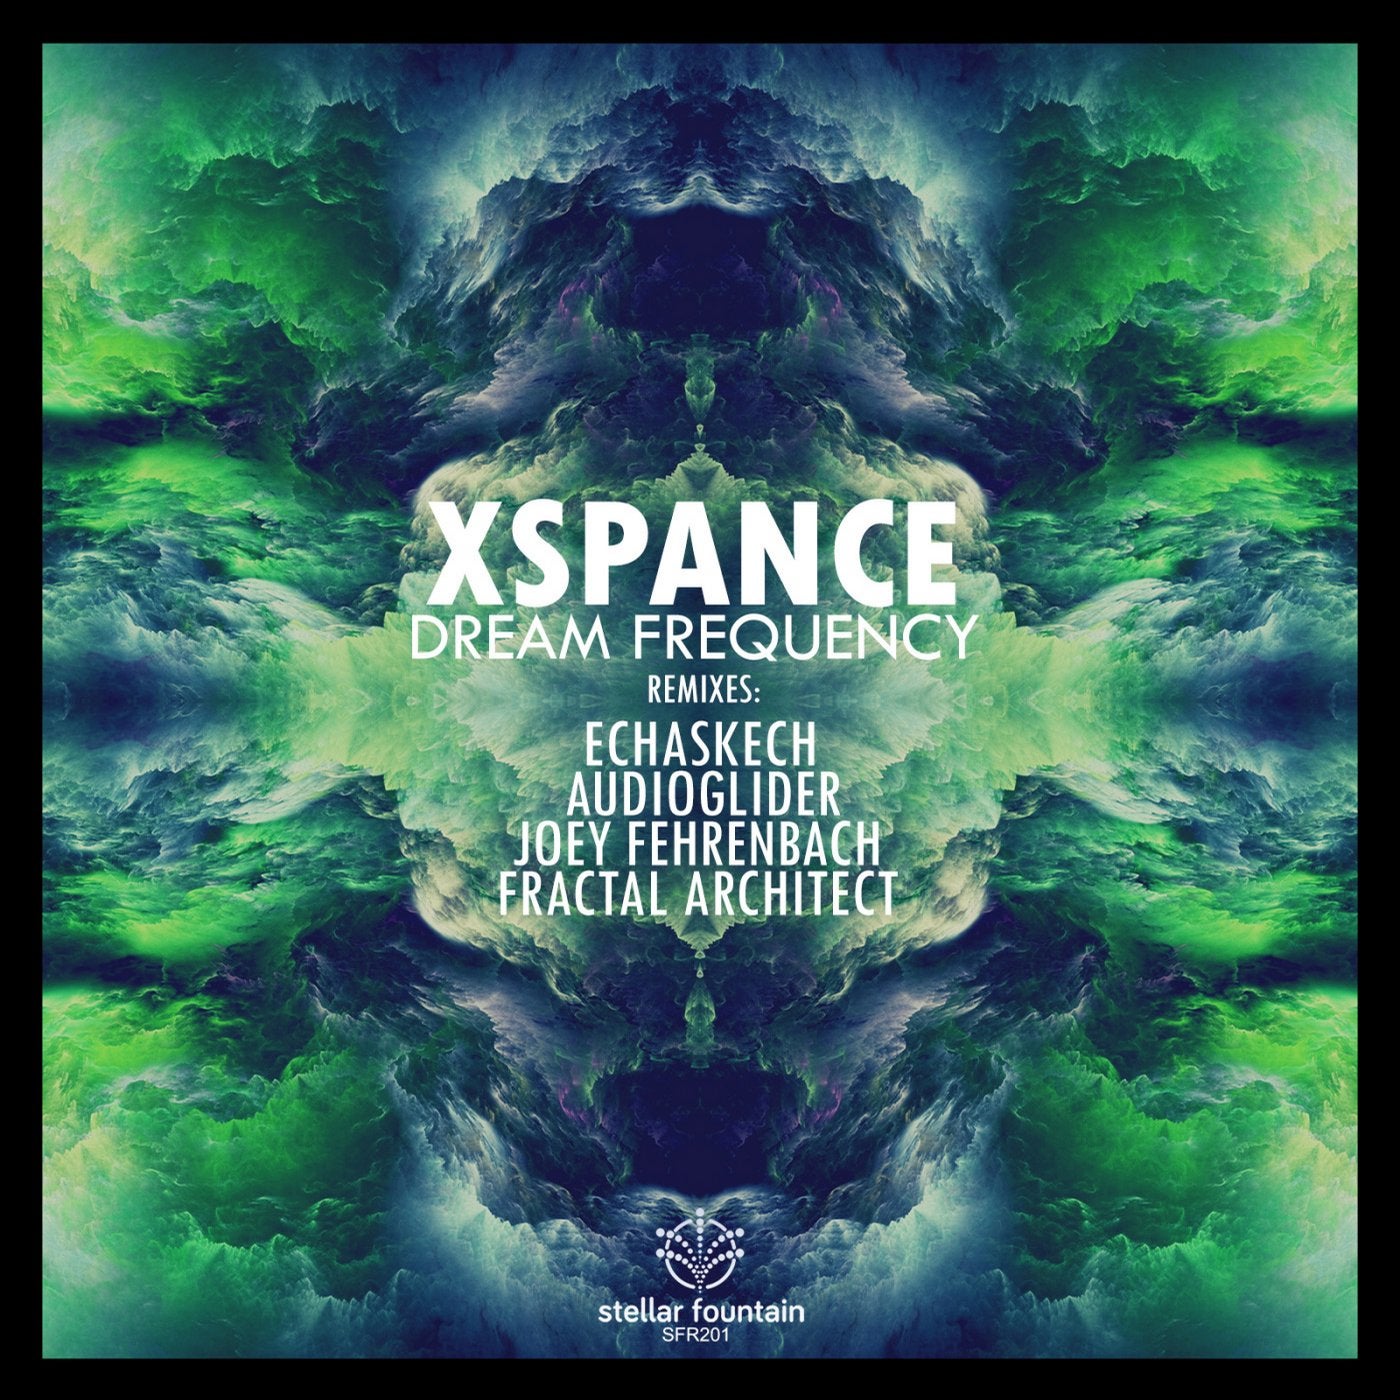 Dream Frequency